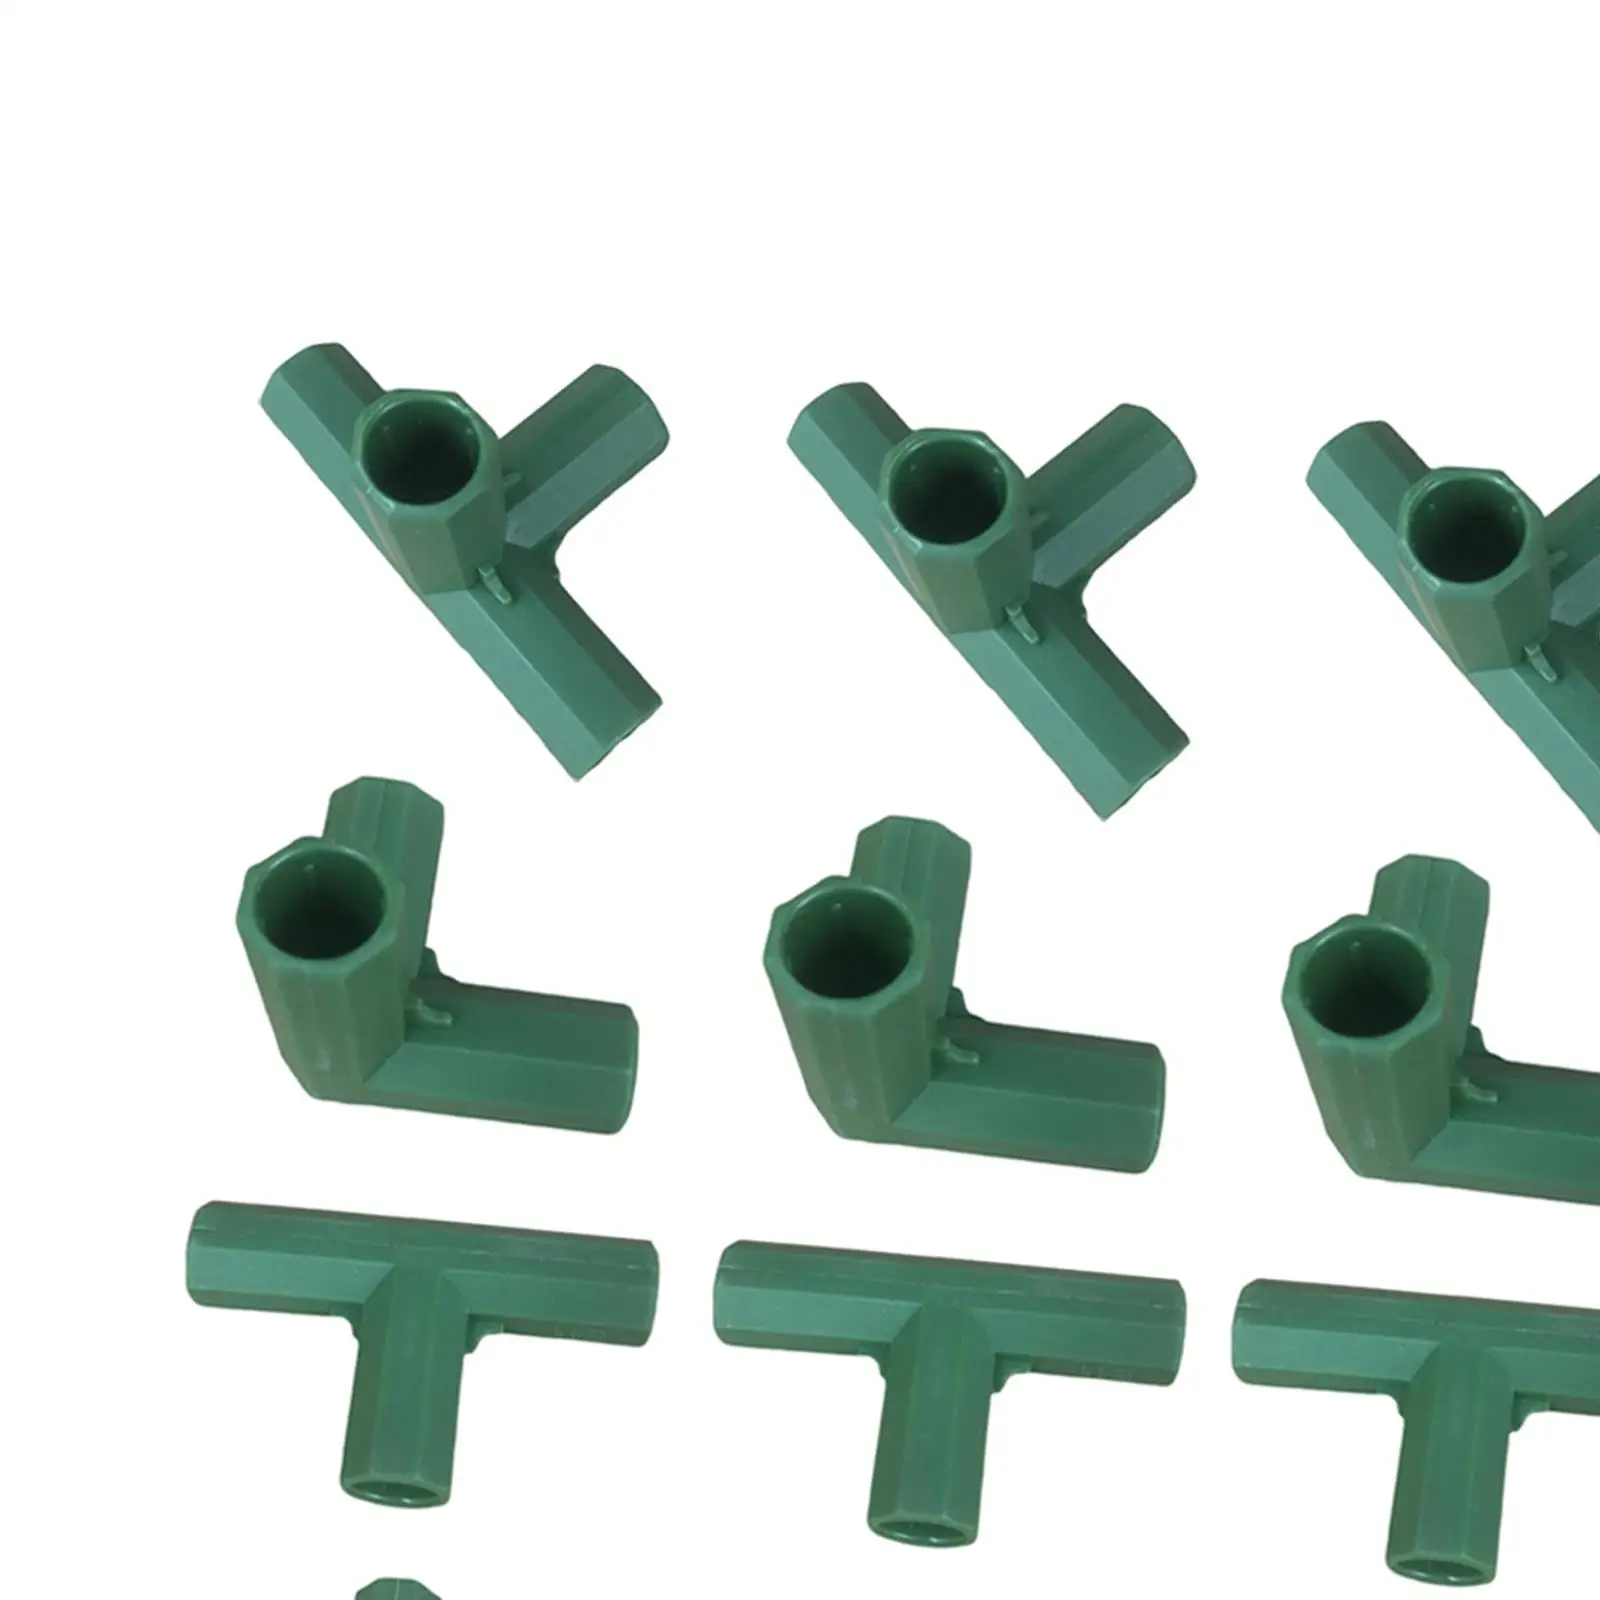 20Pcs Plastic Greenhouse Pipe Building Fittings Frame Connectors for Greenhouse Bracket Connectors